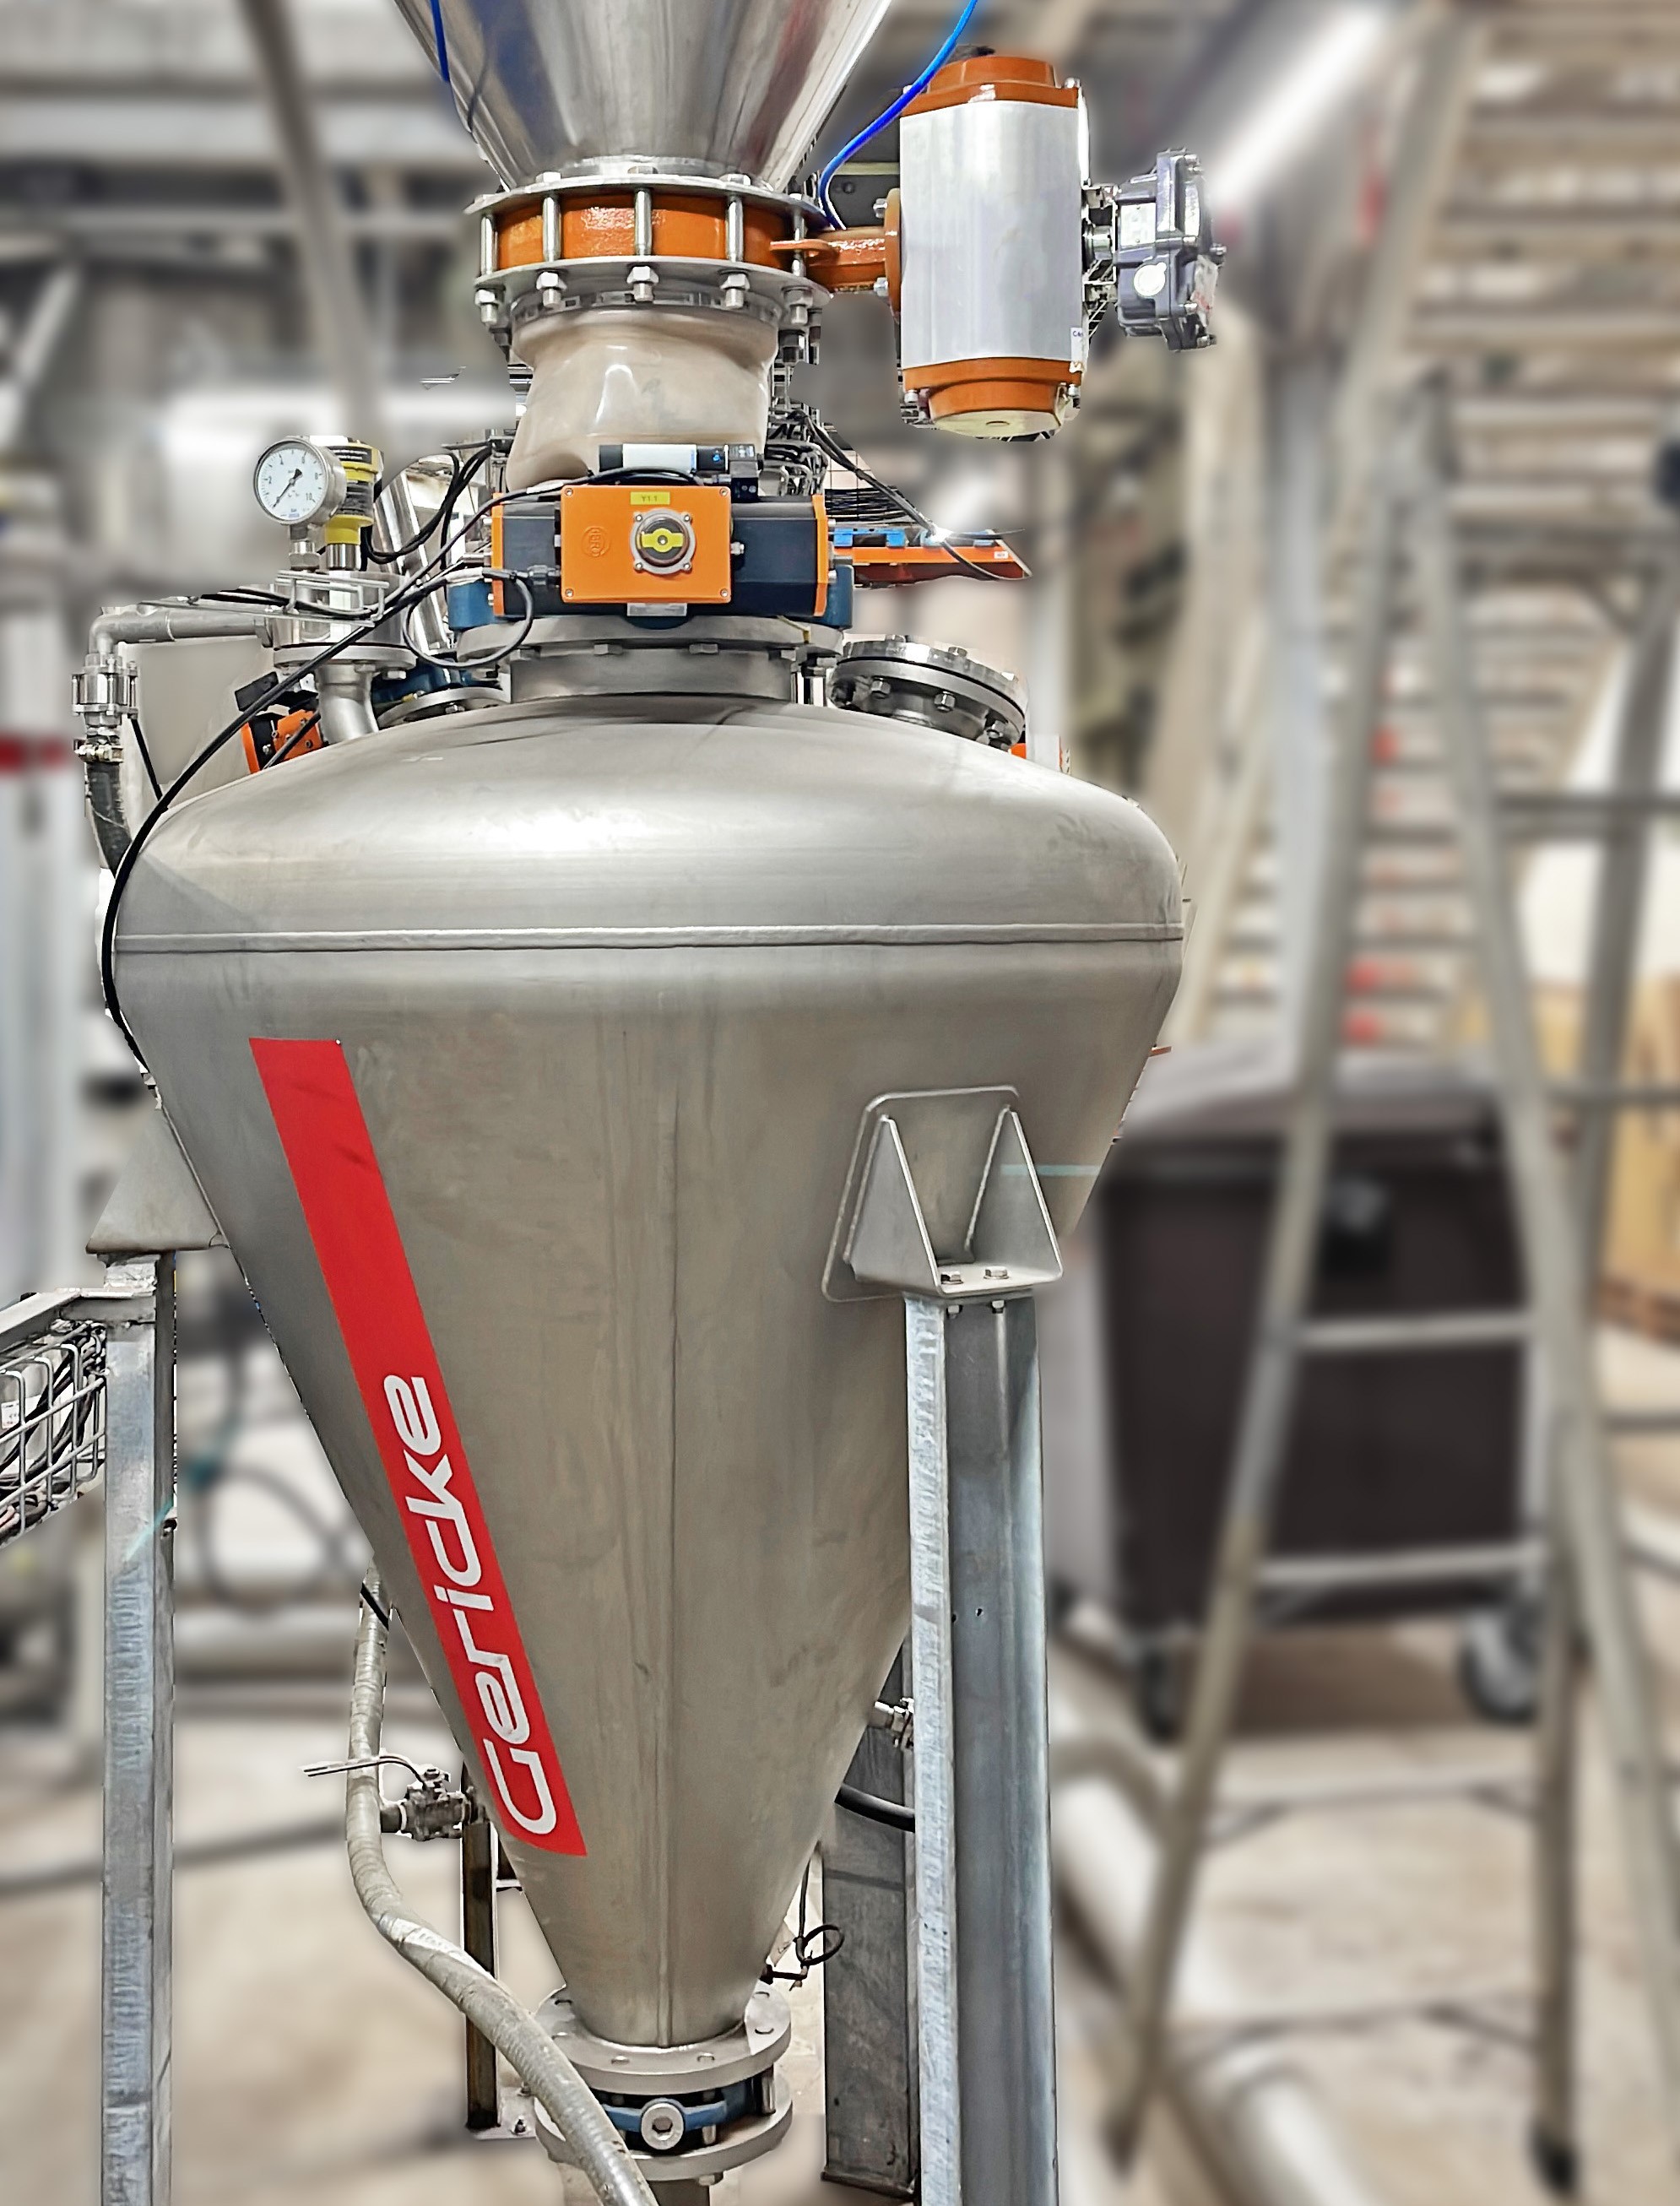 Gericke pneumatic dense phase conveying system for cocoa powder